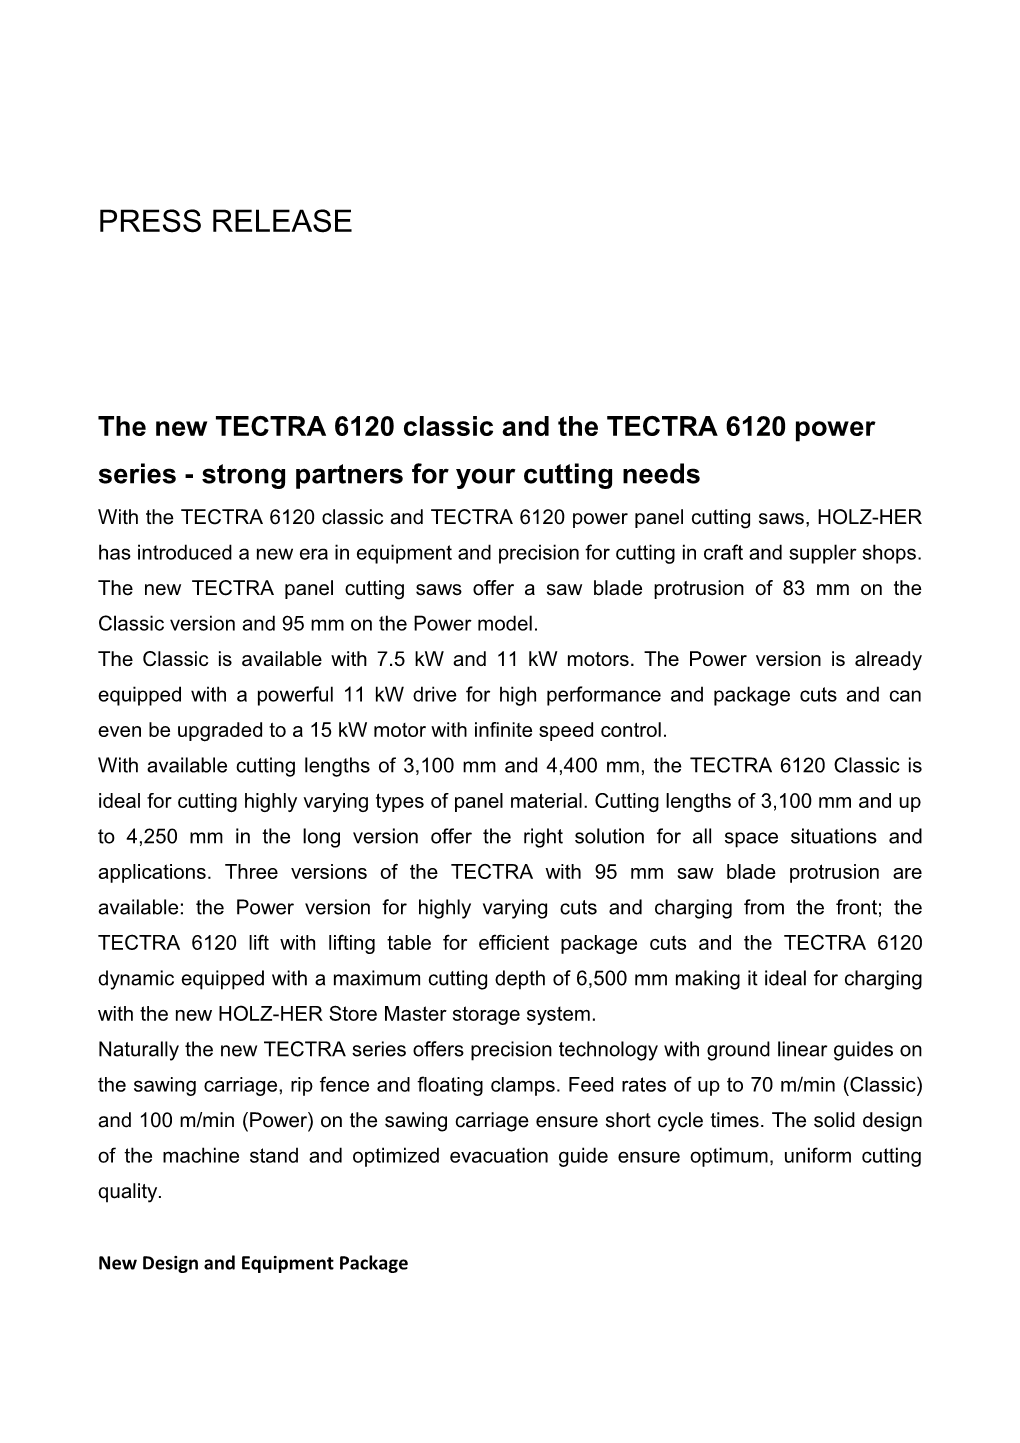 The New TECTRA 6120 Classic and the TECTRA 6120 Power Series - Strong Partners for Your